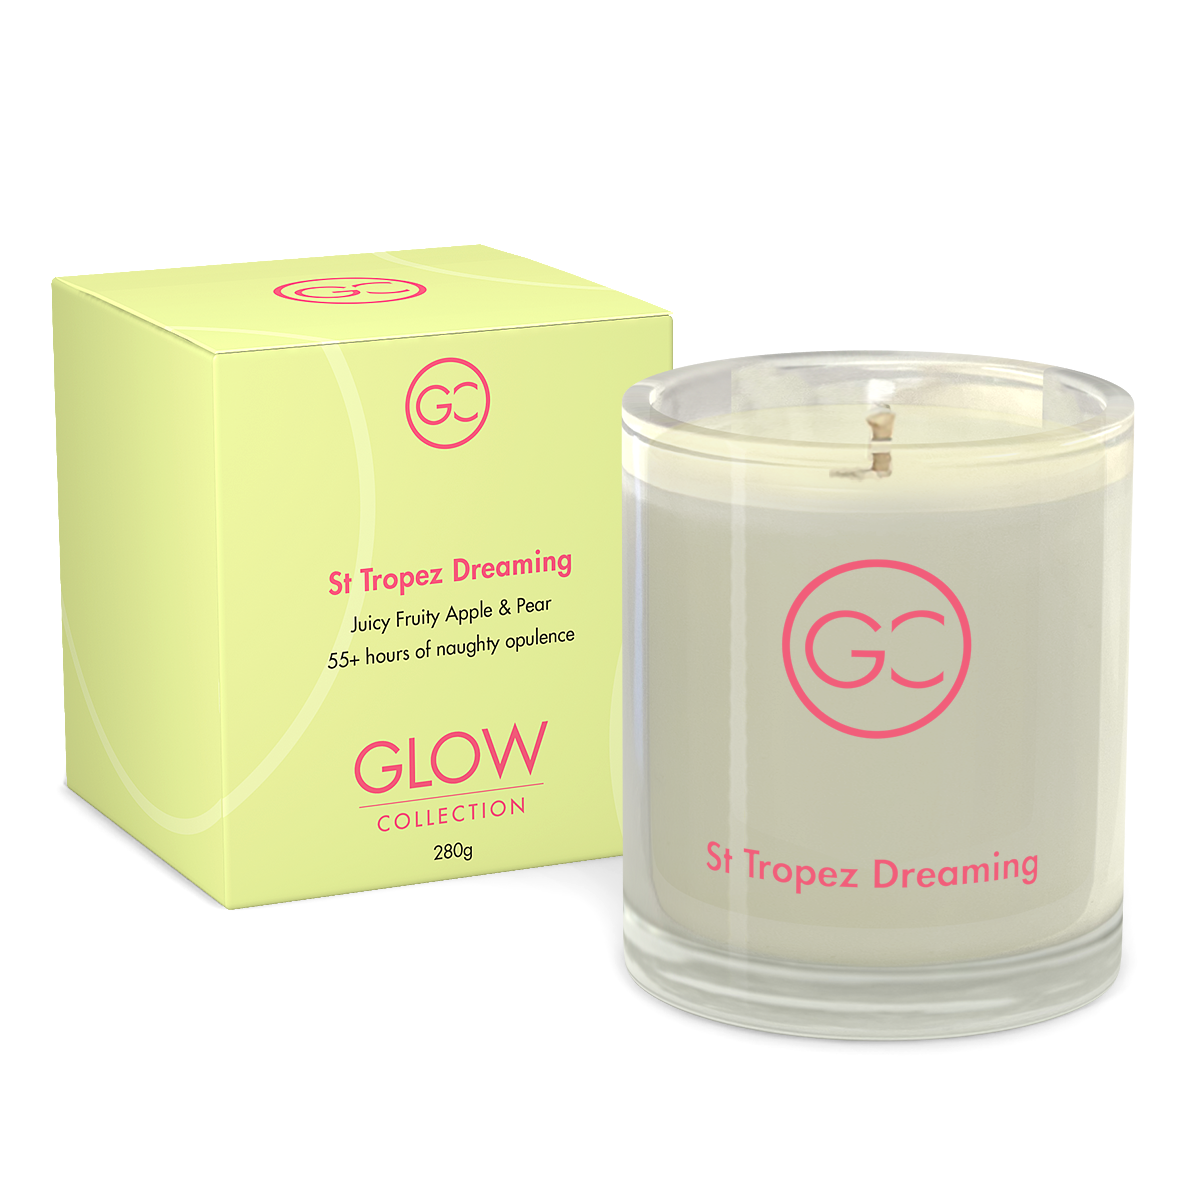 St Tropez Dreaming - French Pear Scented Soy Candle 55hr Burn